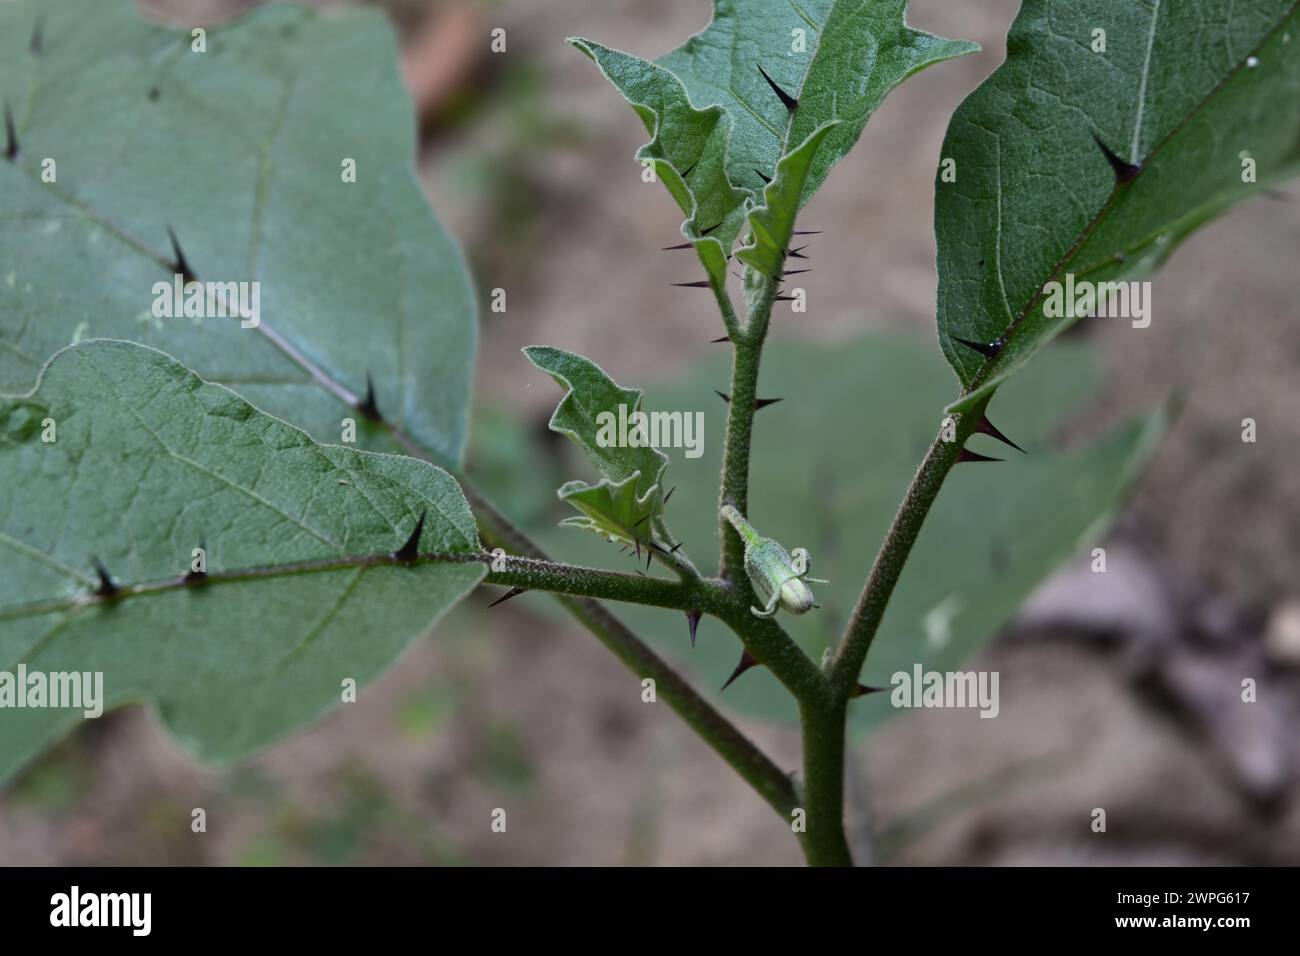 View of an Eggplant (Solanum melongena) plant. The plant has a ready to bloom flower bud and sharp thorns on the plant's leaves and the stems Stock Photo